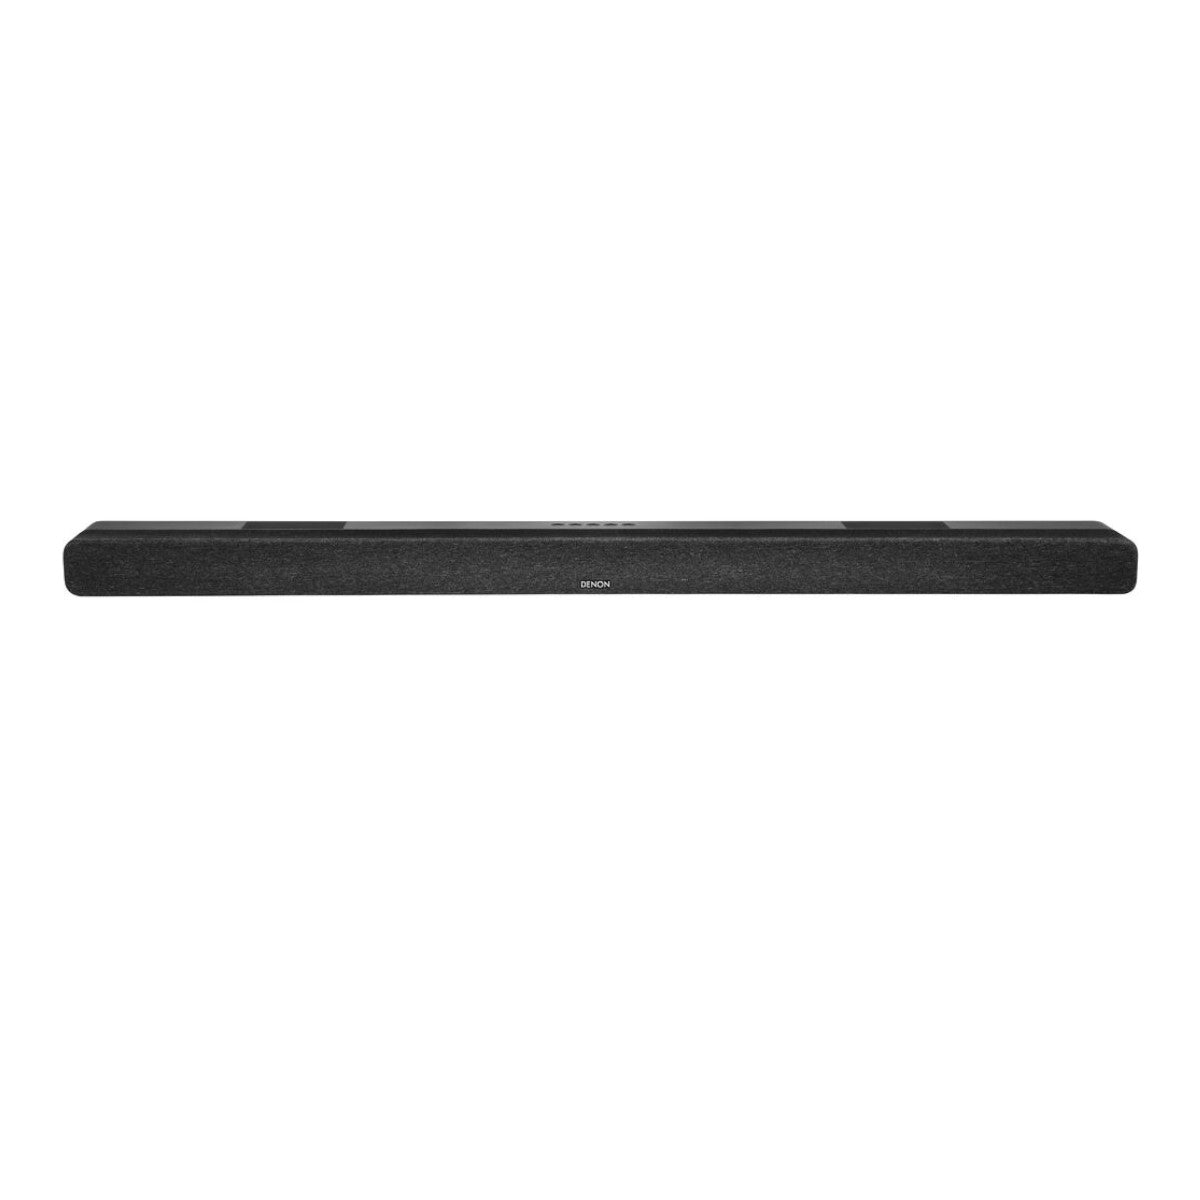 Denon DHT-S517 Sound bar with Dolby Atmos, Bluetooth and Wireless Subwoofer - Soundbar Front View